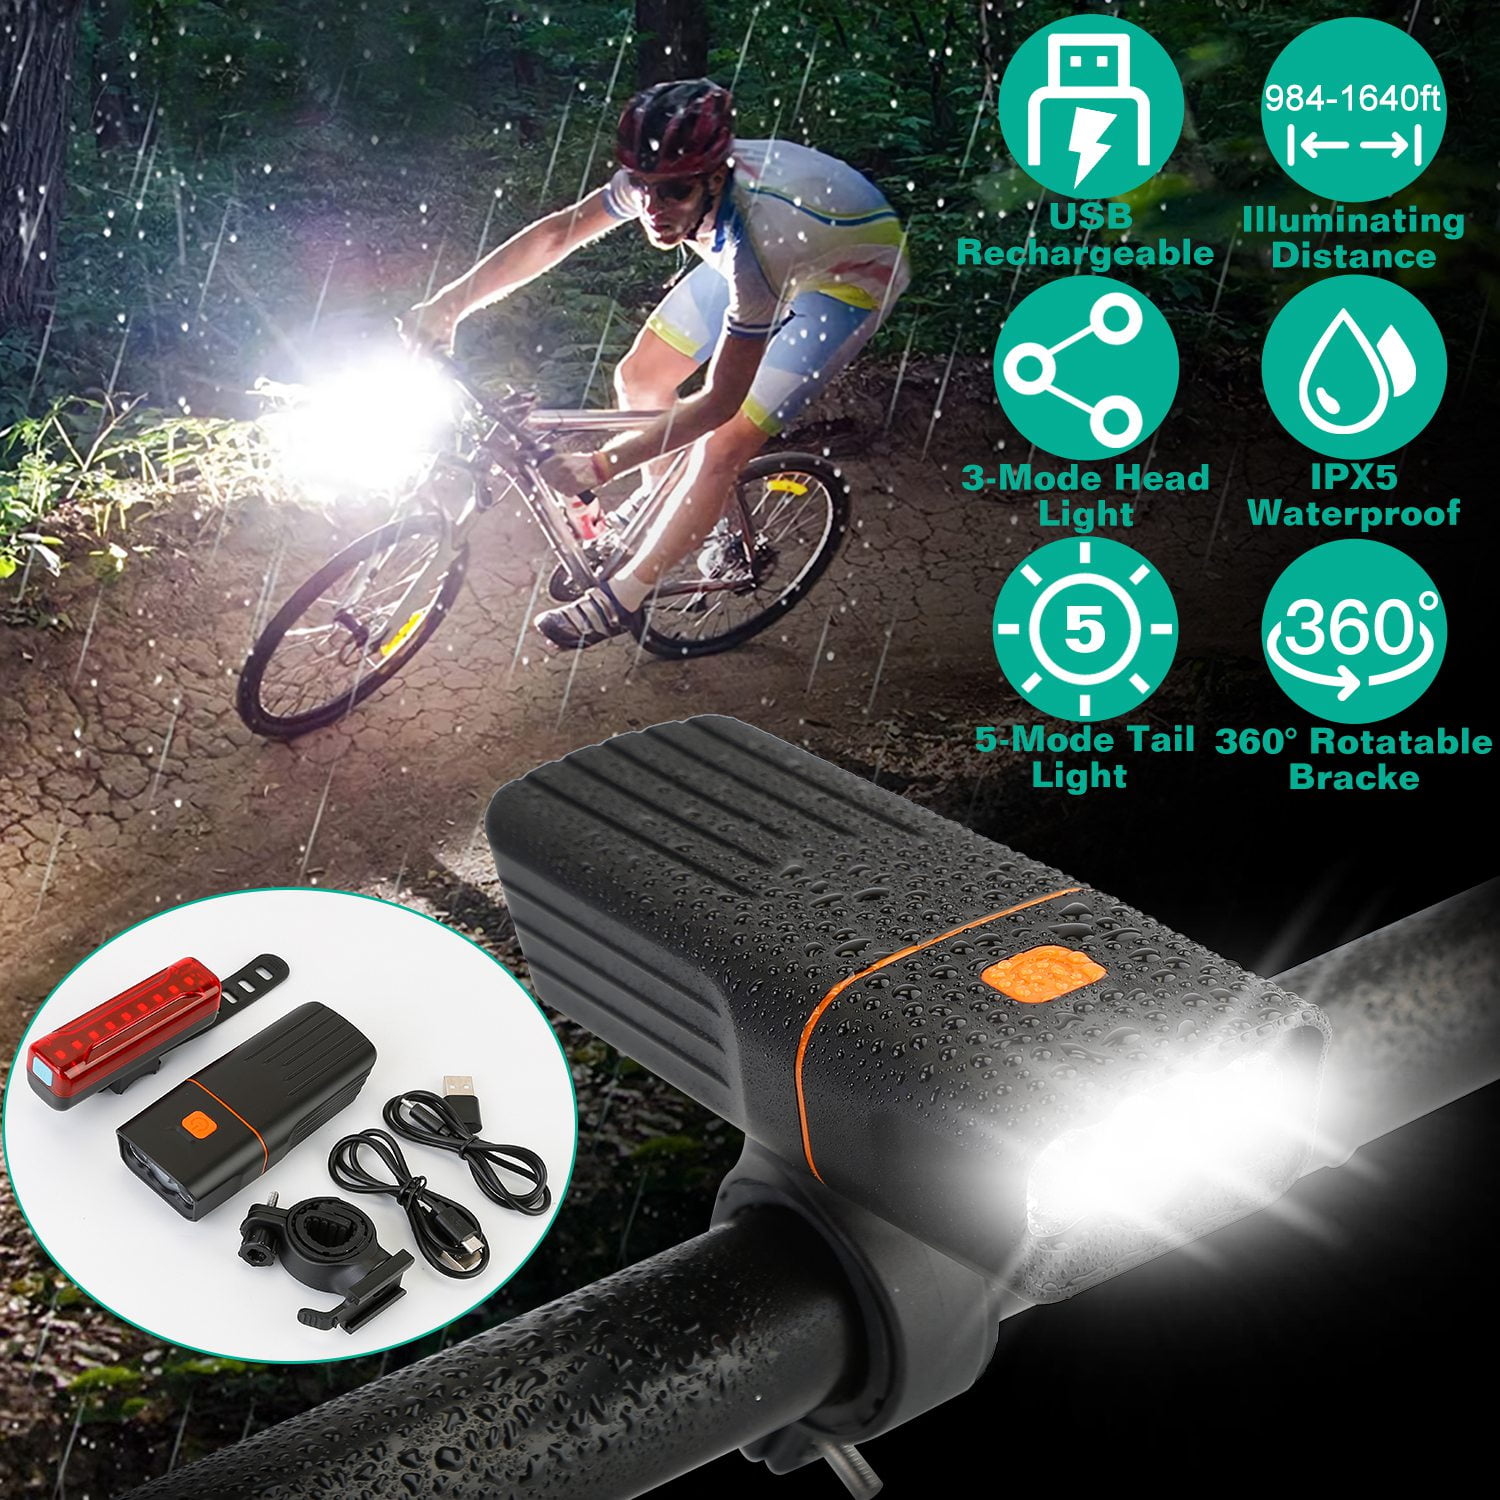 LED Bicycle Headlight Bike Head Light Front Rear Lamp Cycling USB Rechargeable 